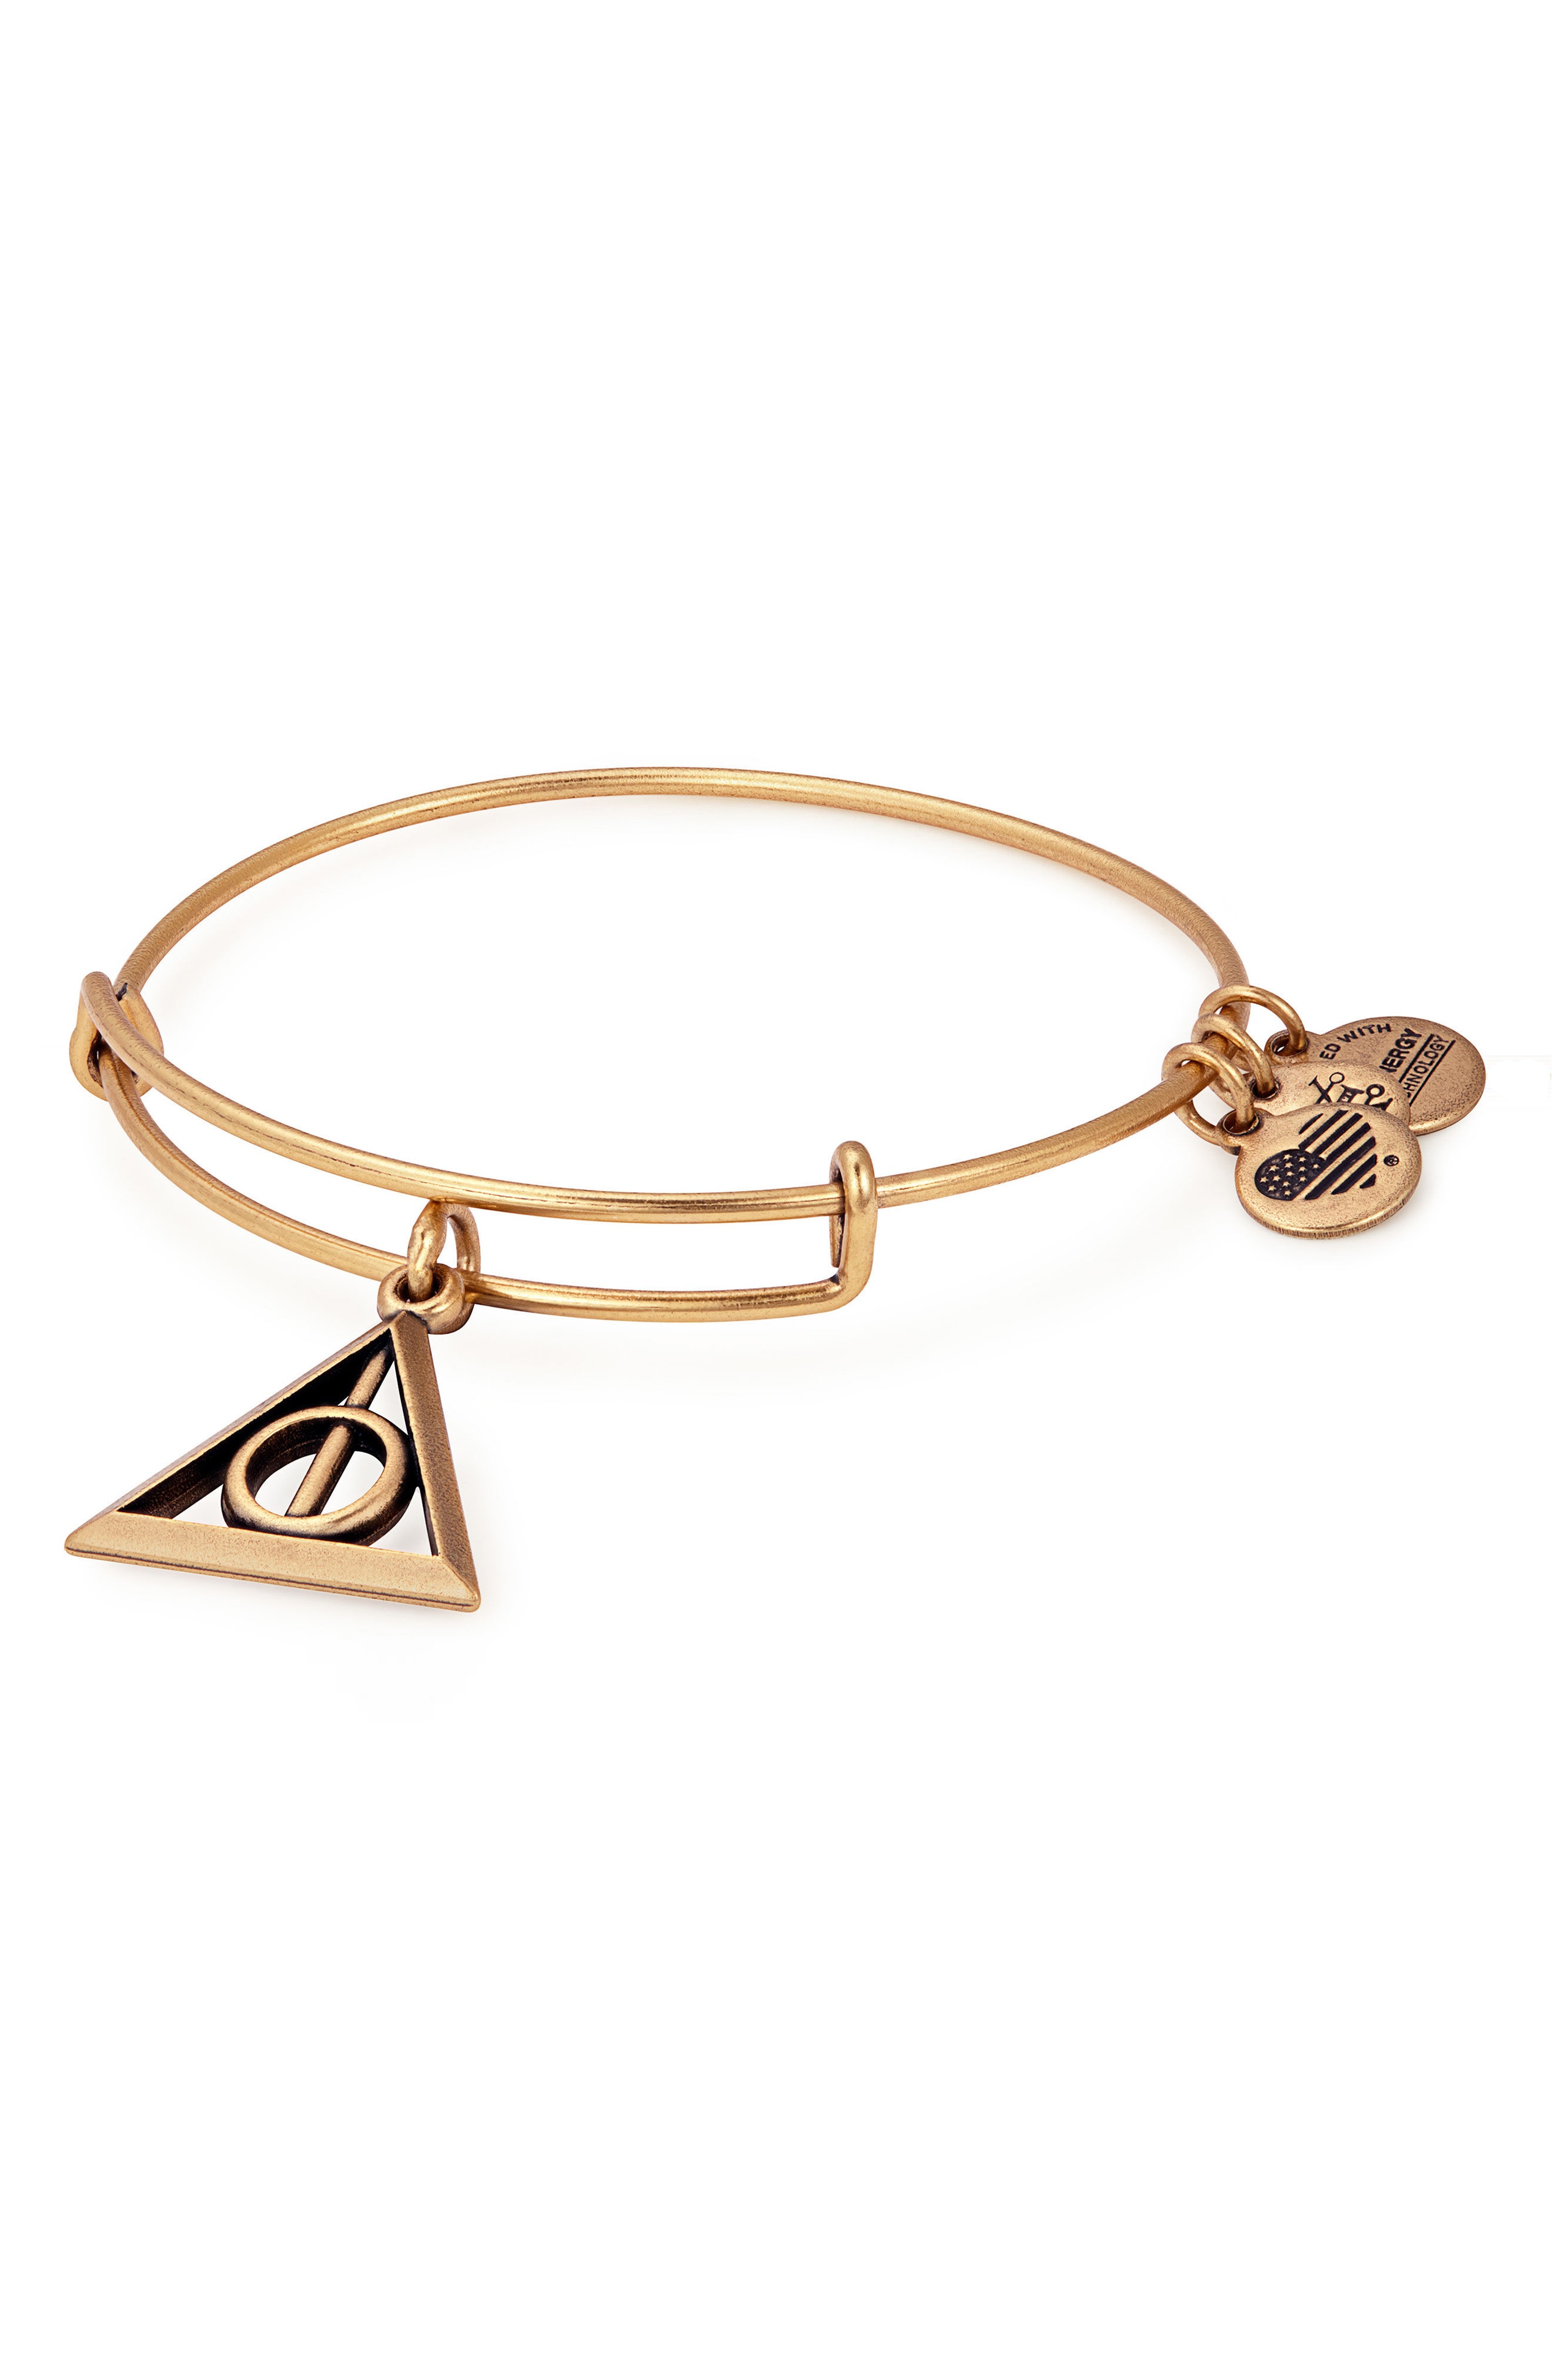 Alex and Ani Harry Potter Deathly Hallows Adjustable Wire Bangle